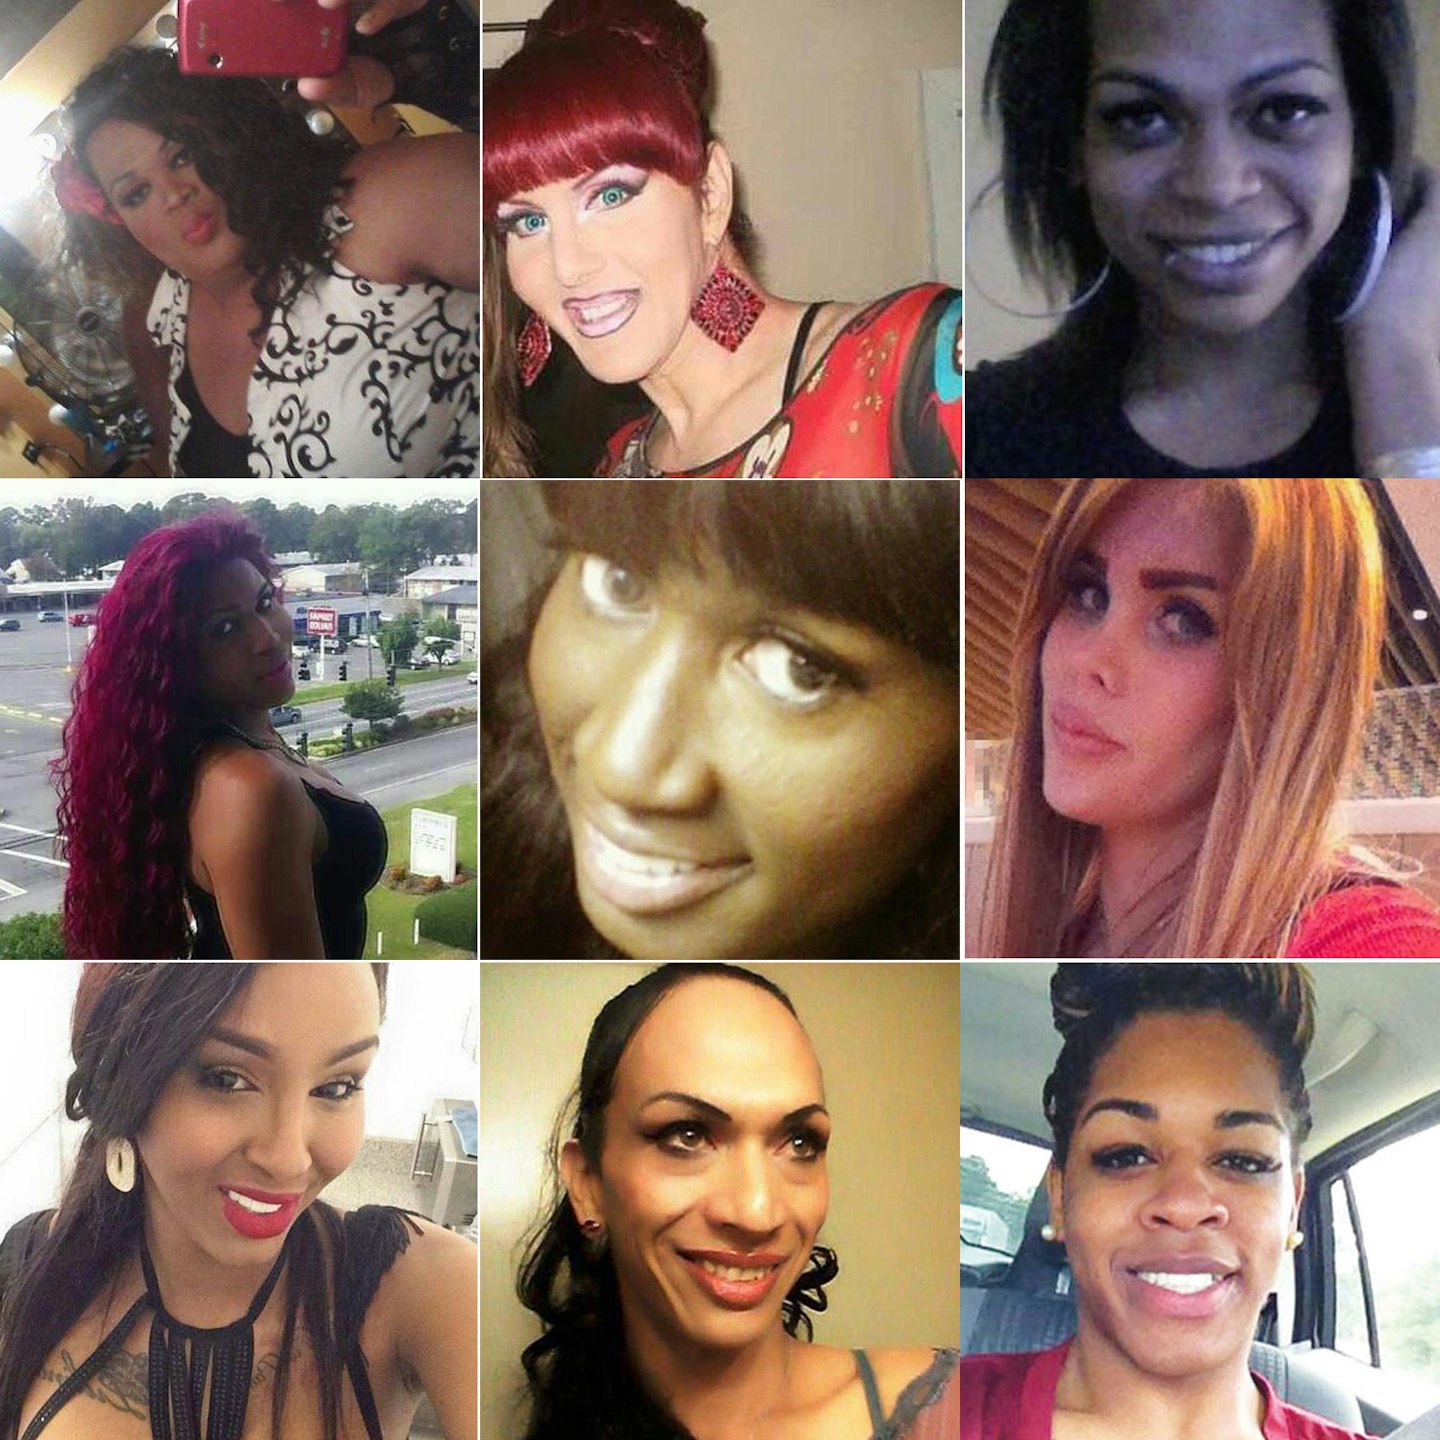 Transgender people murdered in the US this year